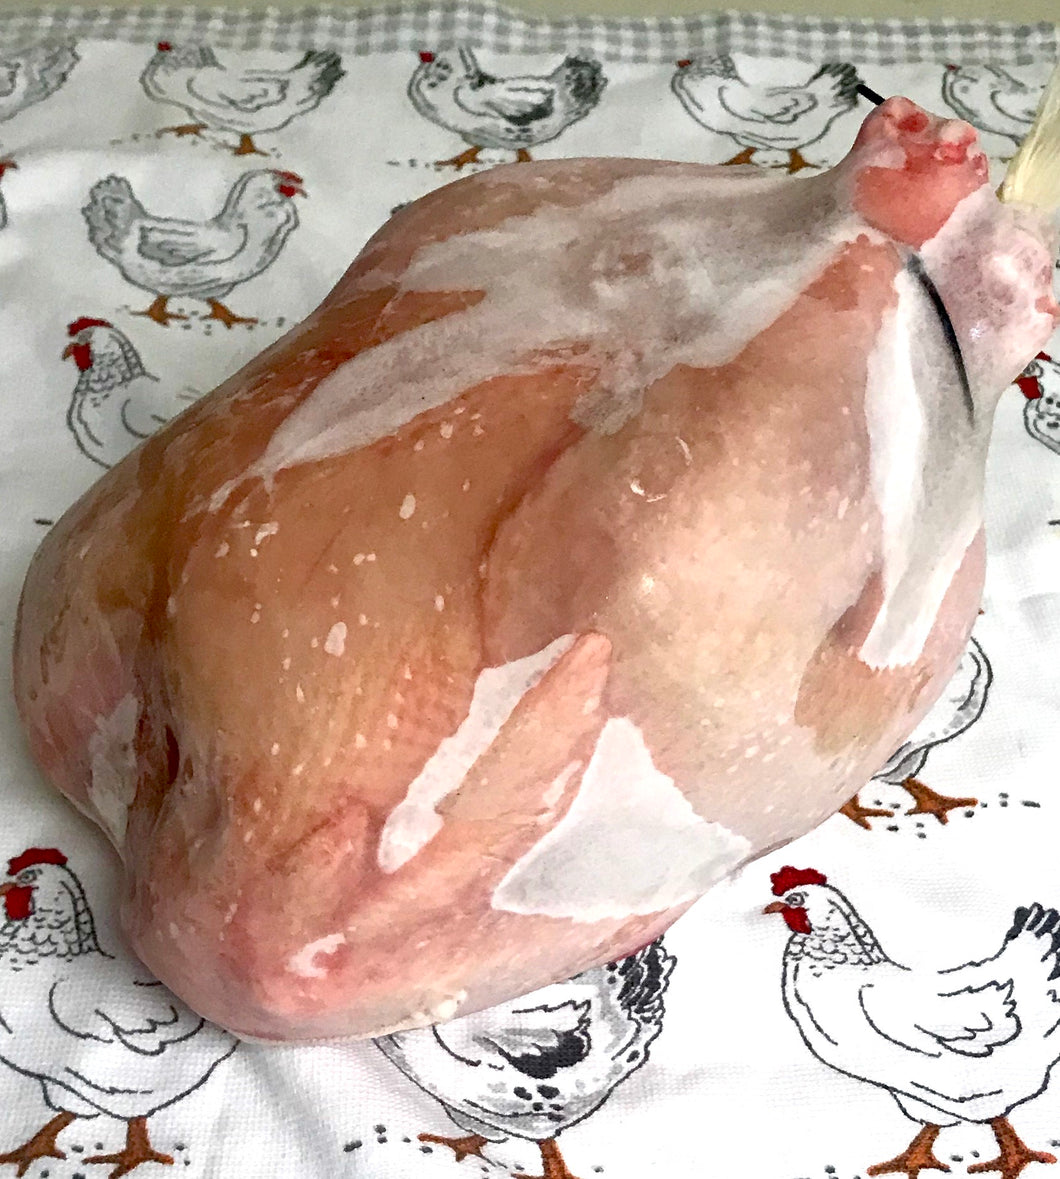 PASTURED POULTRY:  LARGE WHOLE CHICKEN